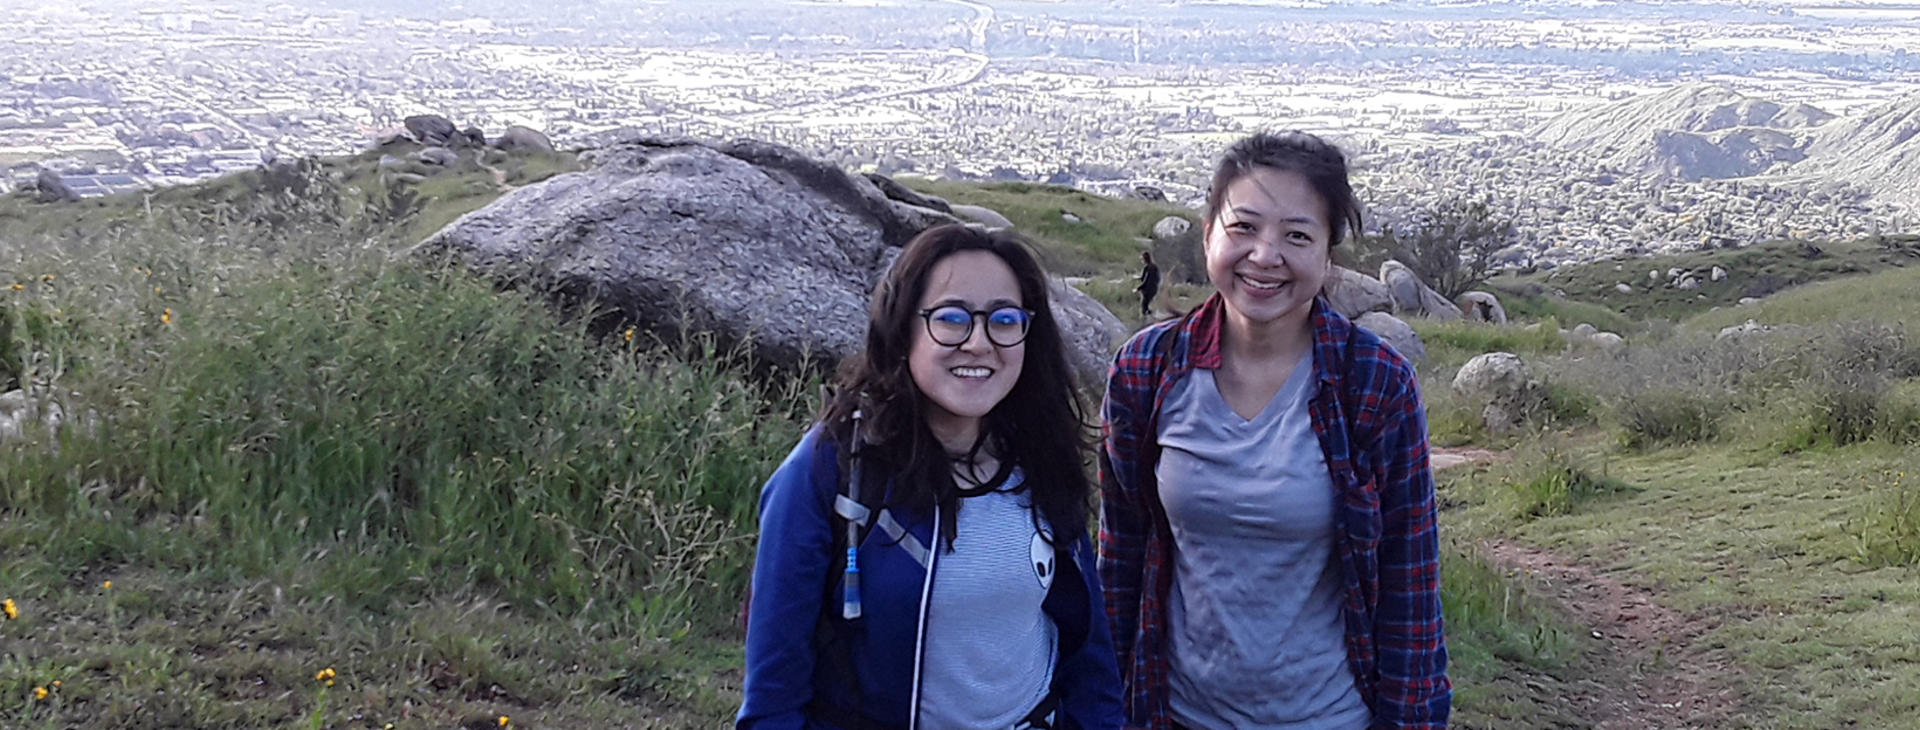 grad students hiking above the city